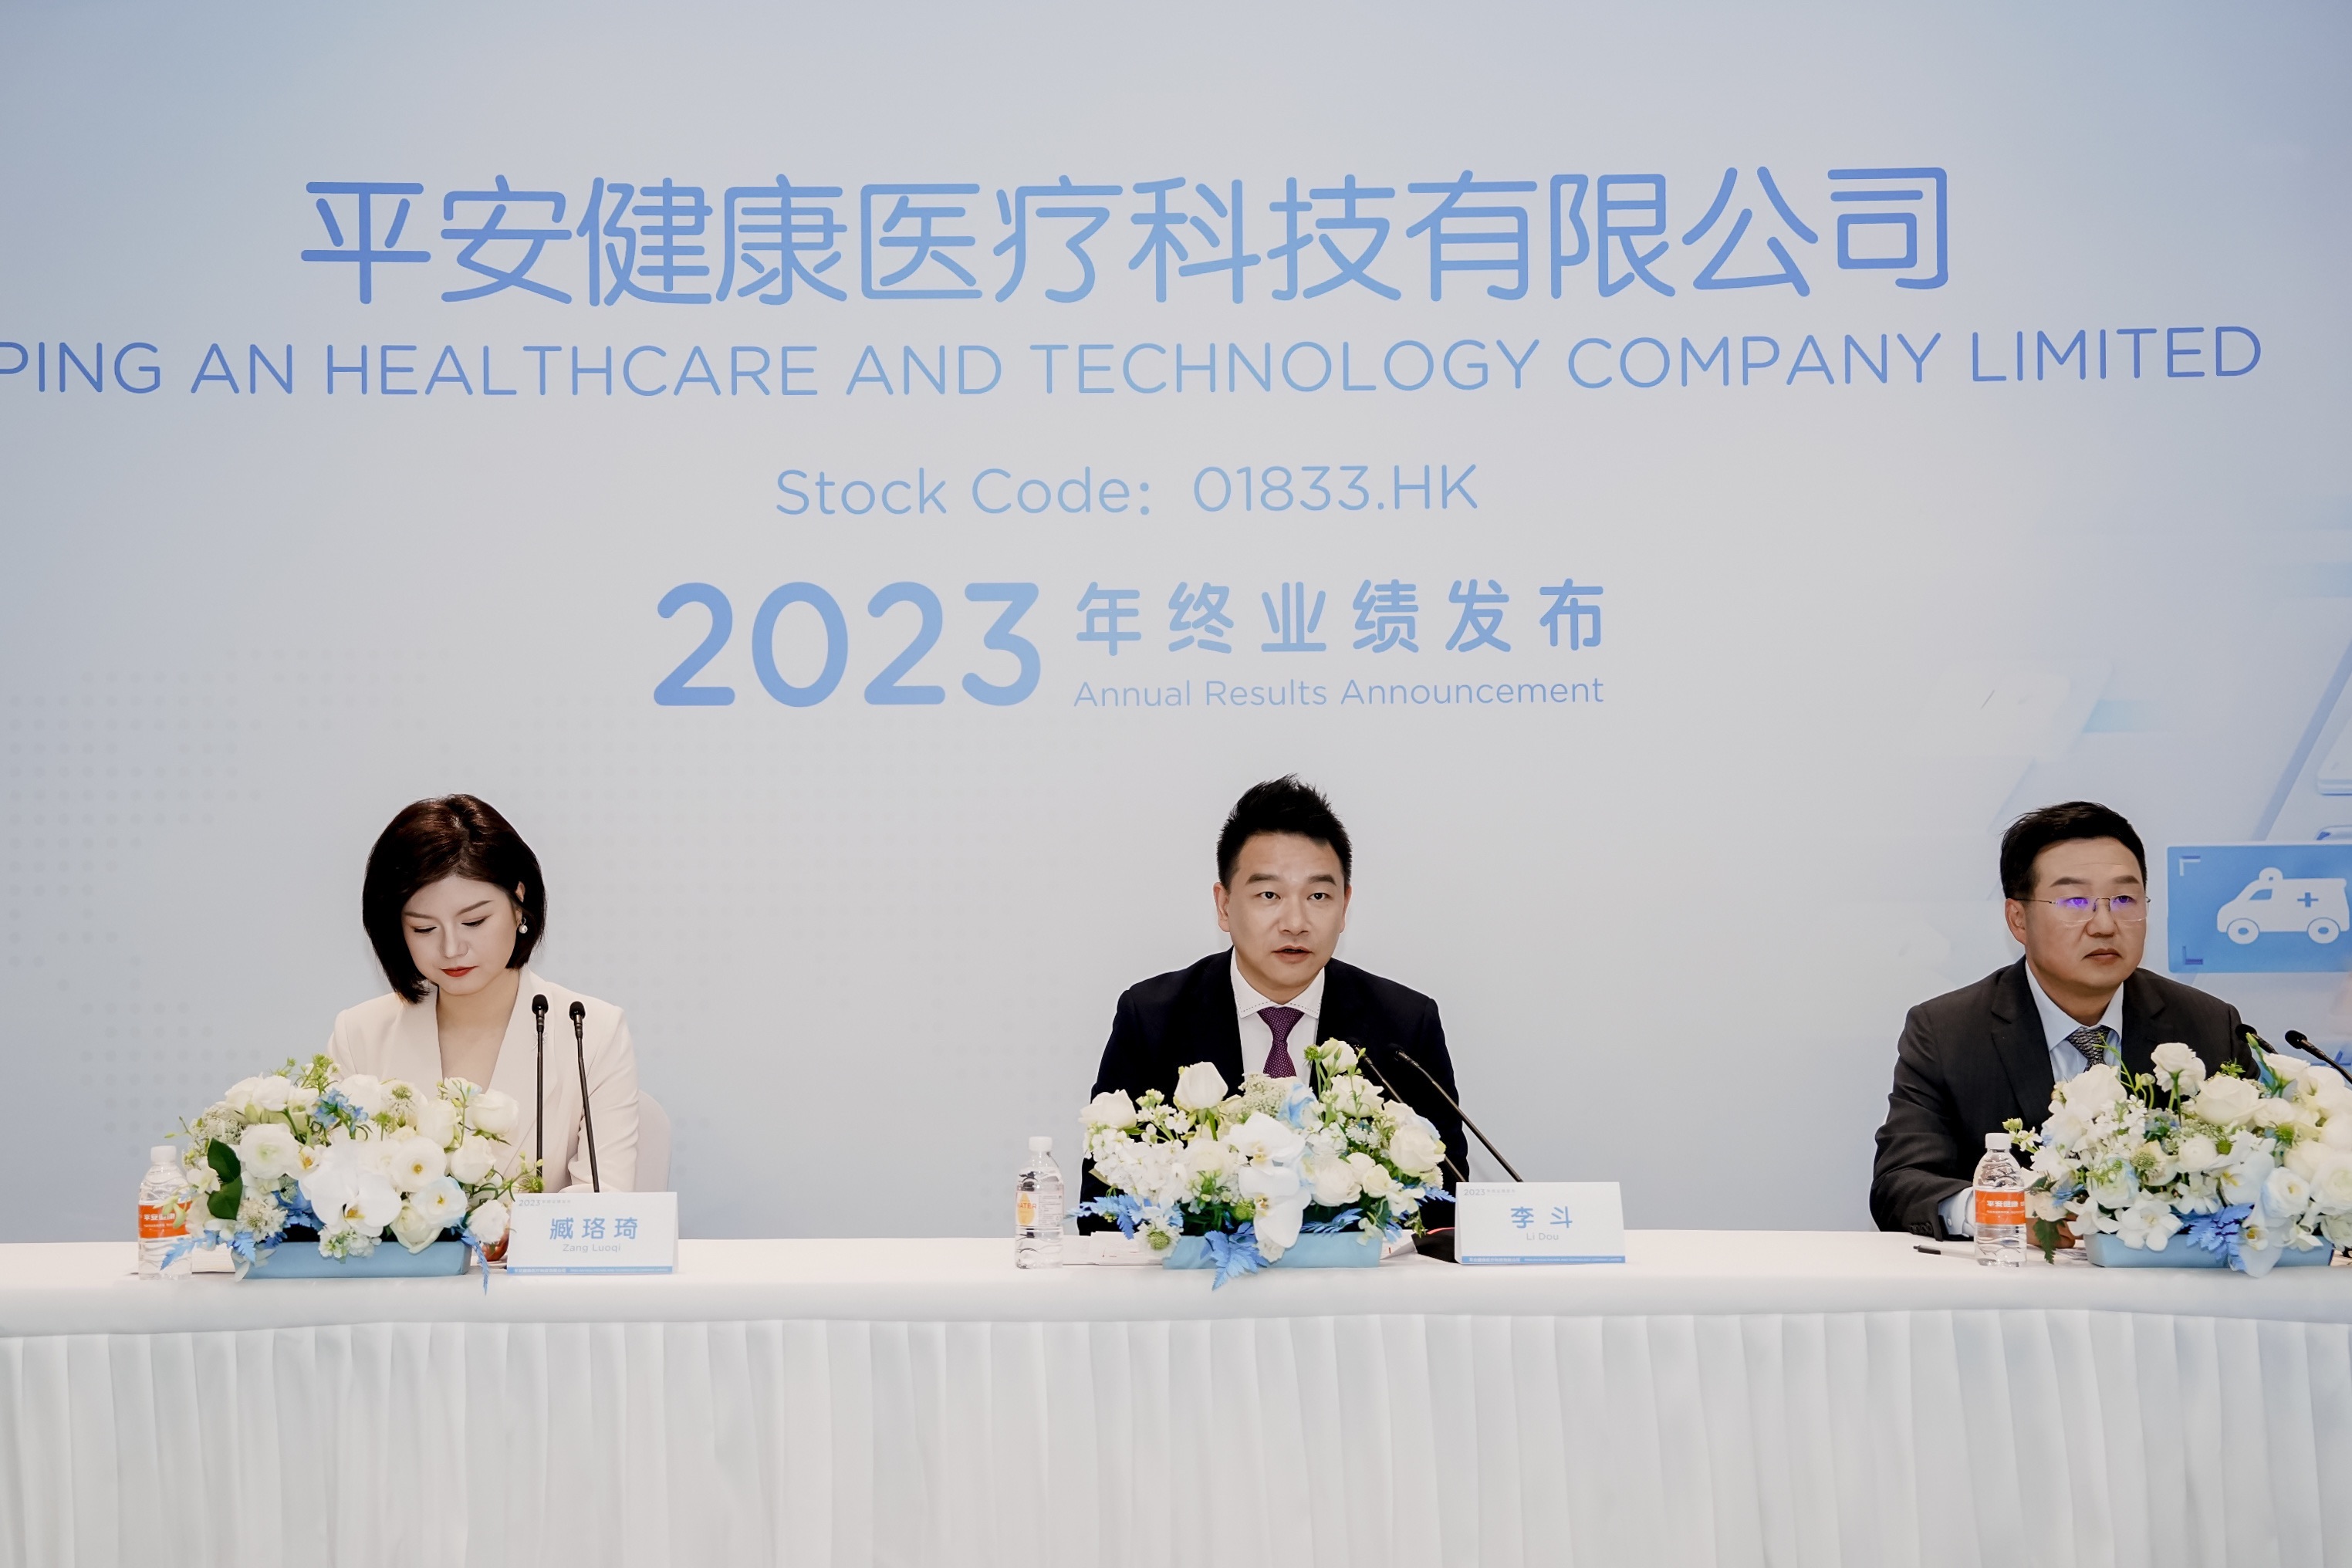 Ping An Health announces 2023 annual results Achieves strong growth in strategic businesses  Accelerates net loss narrowing by 47.6%